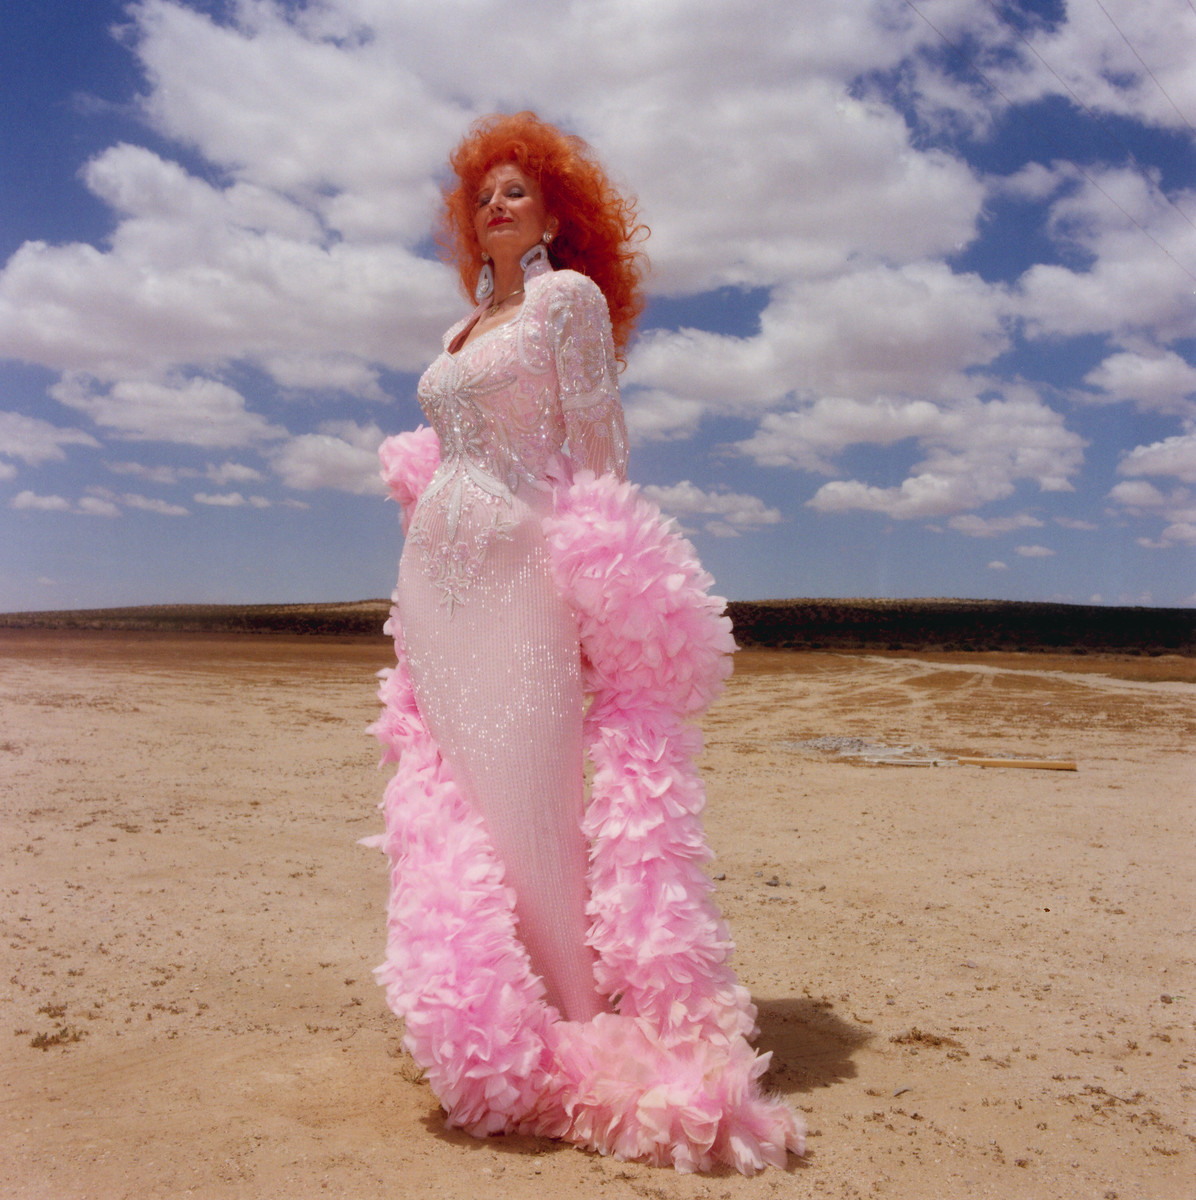 Tempest Storm  Exotic World 1996